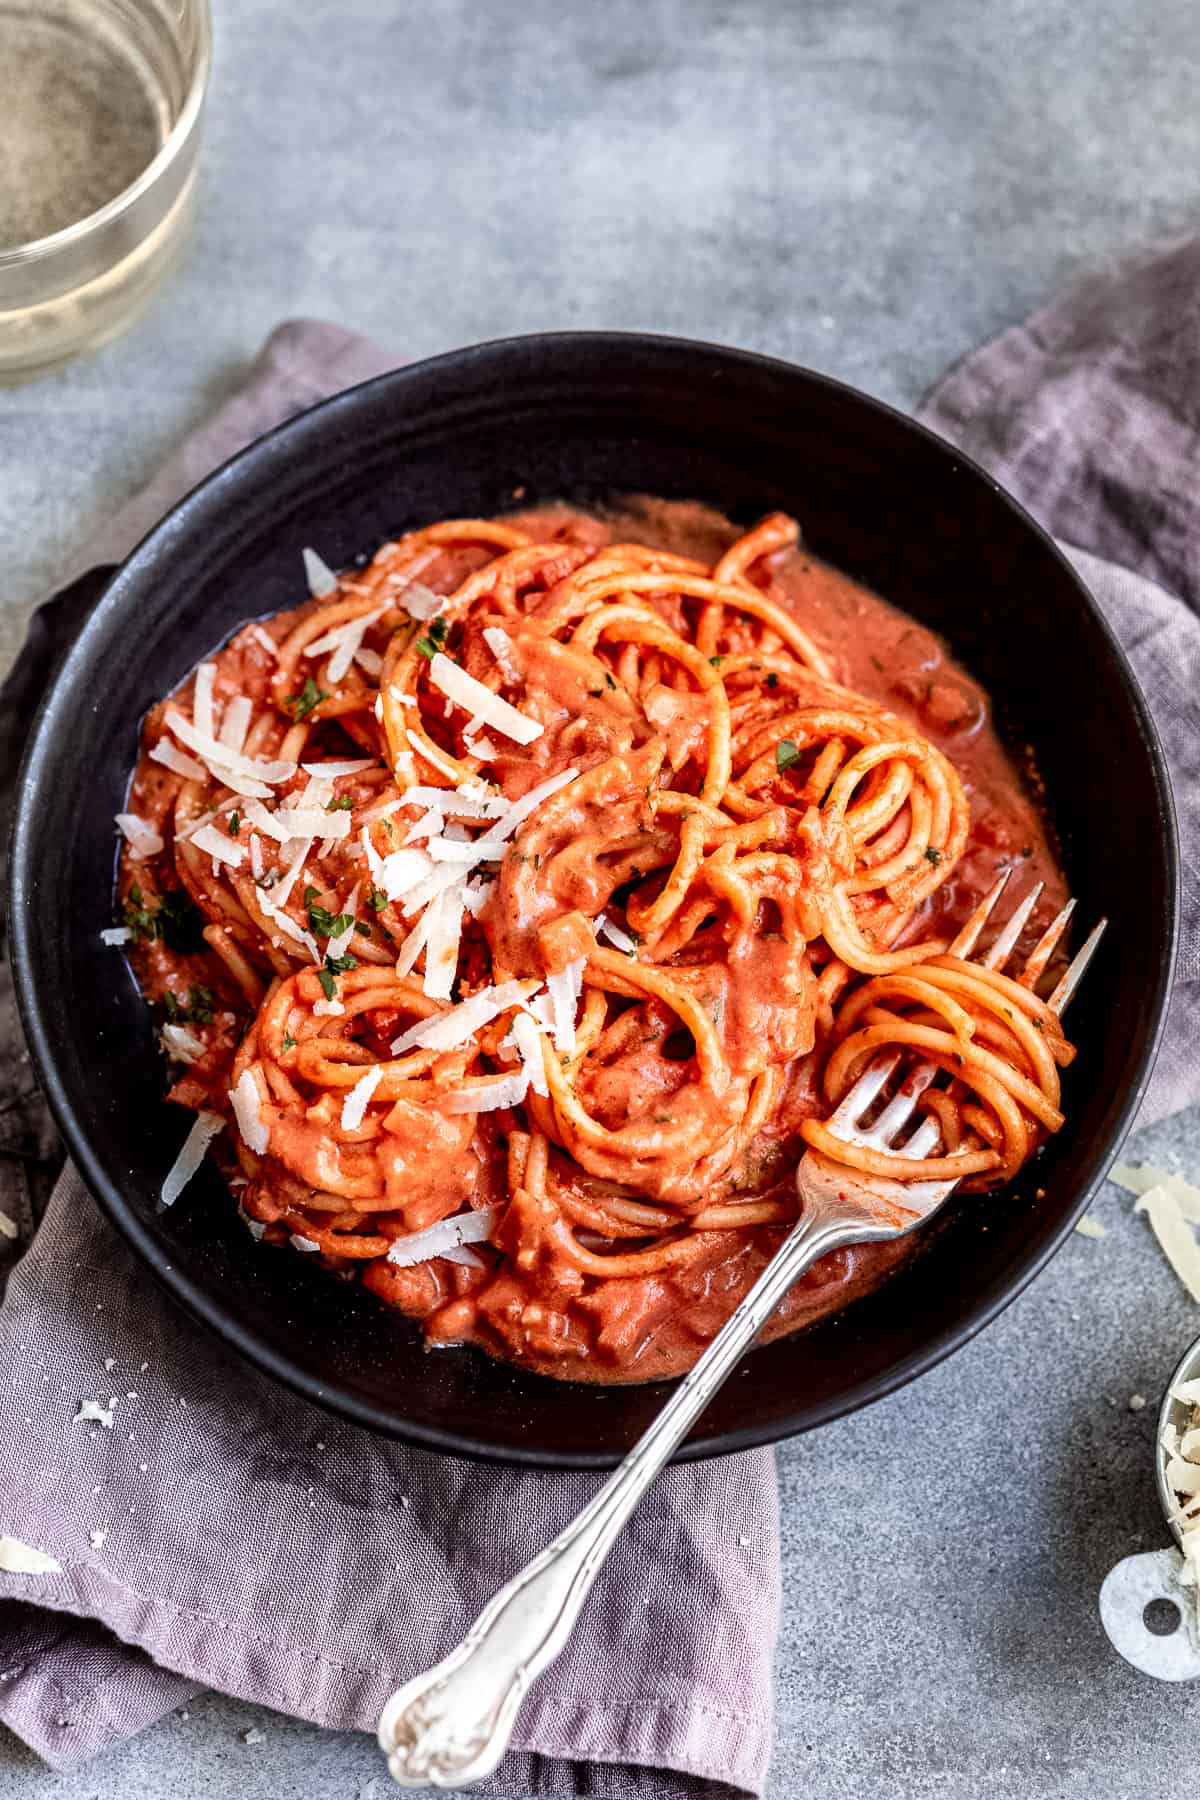 Rose pasta sauce- Pink sauce in a bowl with a fork.